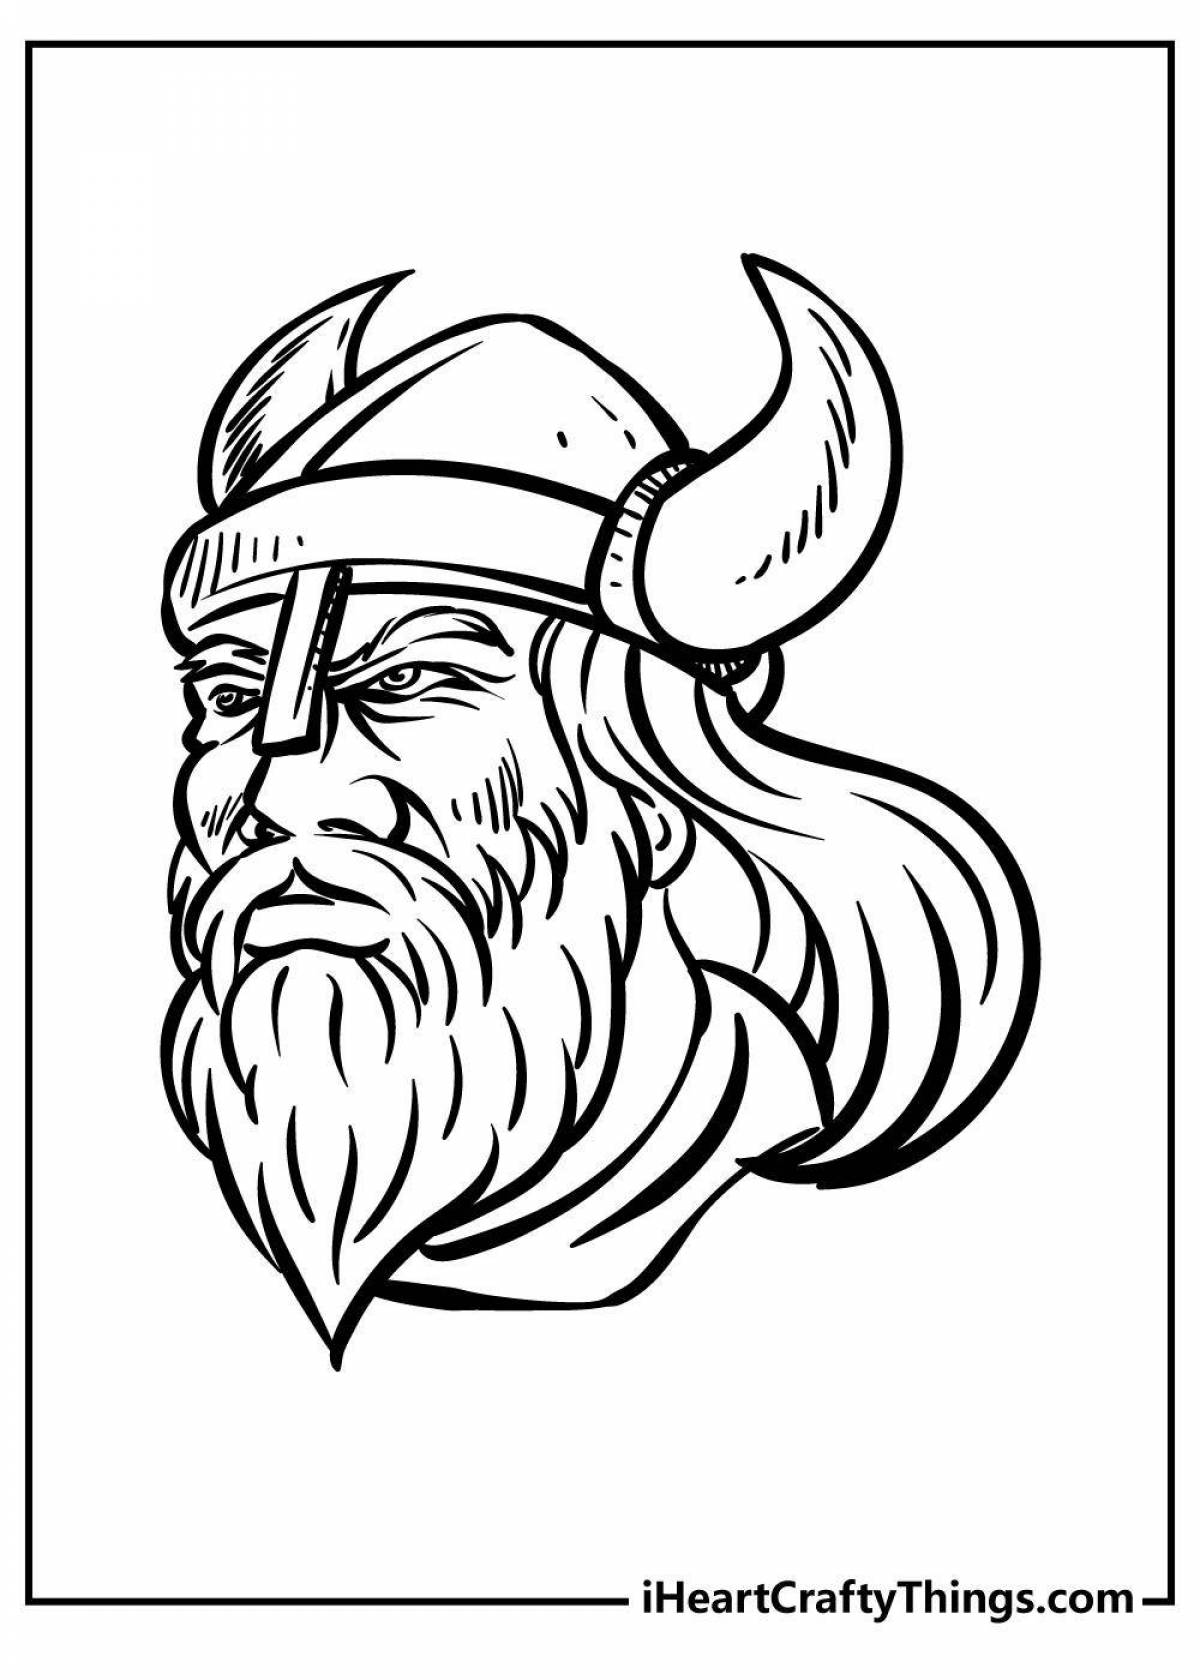 Viking scary faces coloring book